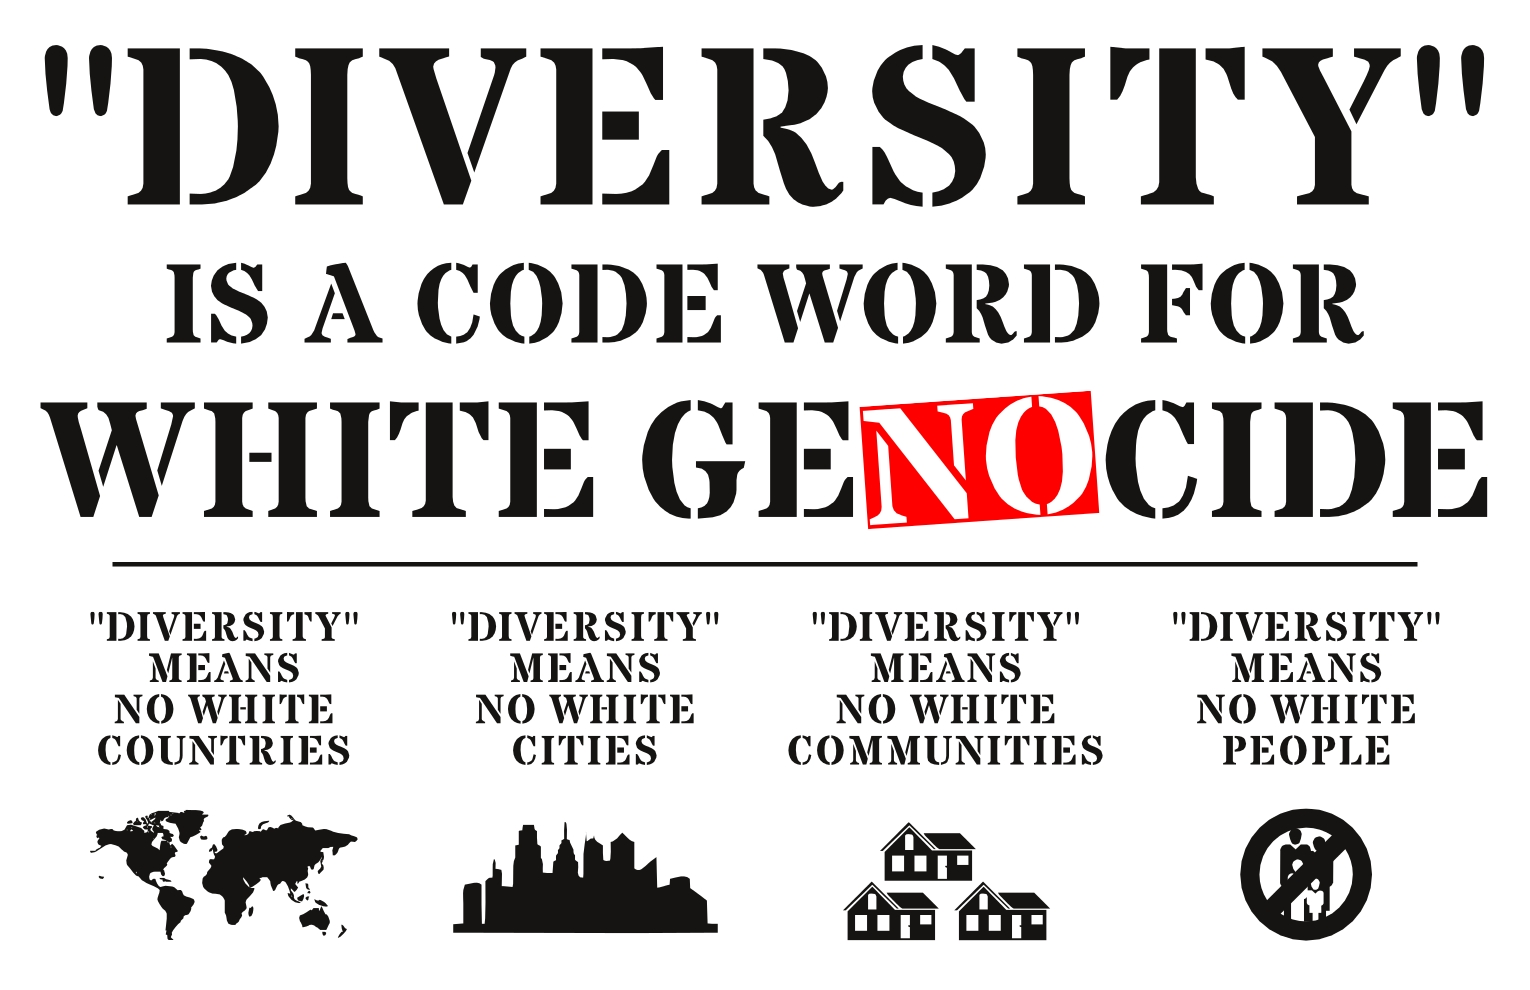 sample - diacwfwg means no white countries, cities, coummunities, people - sign - 11x17